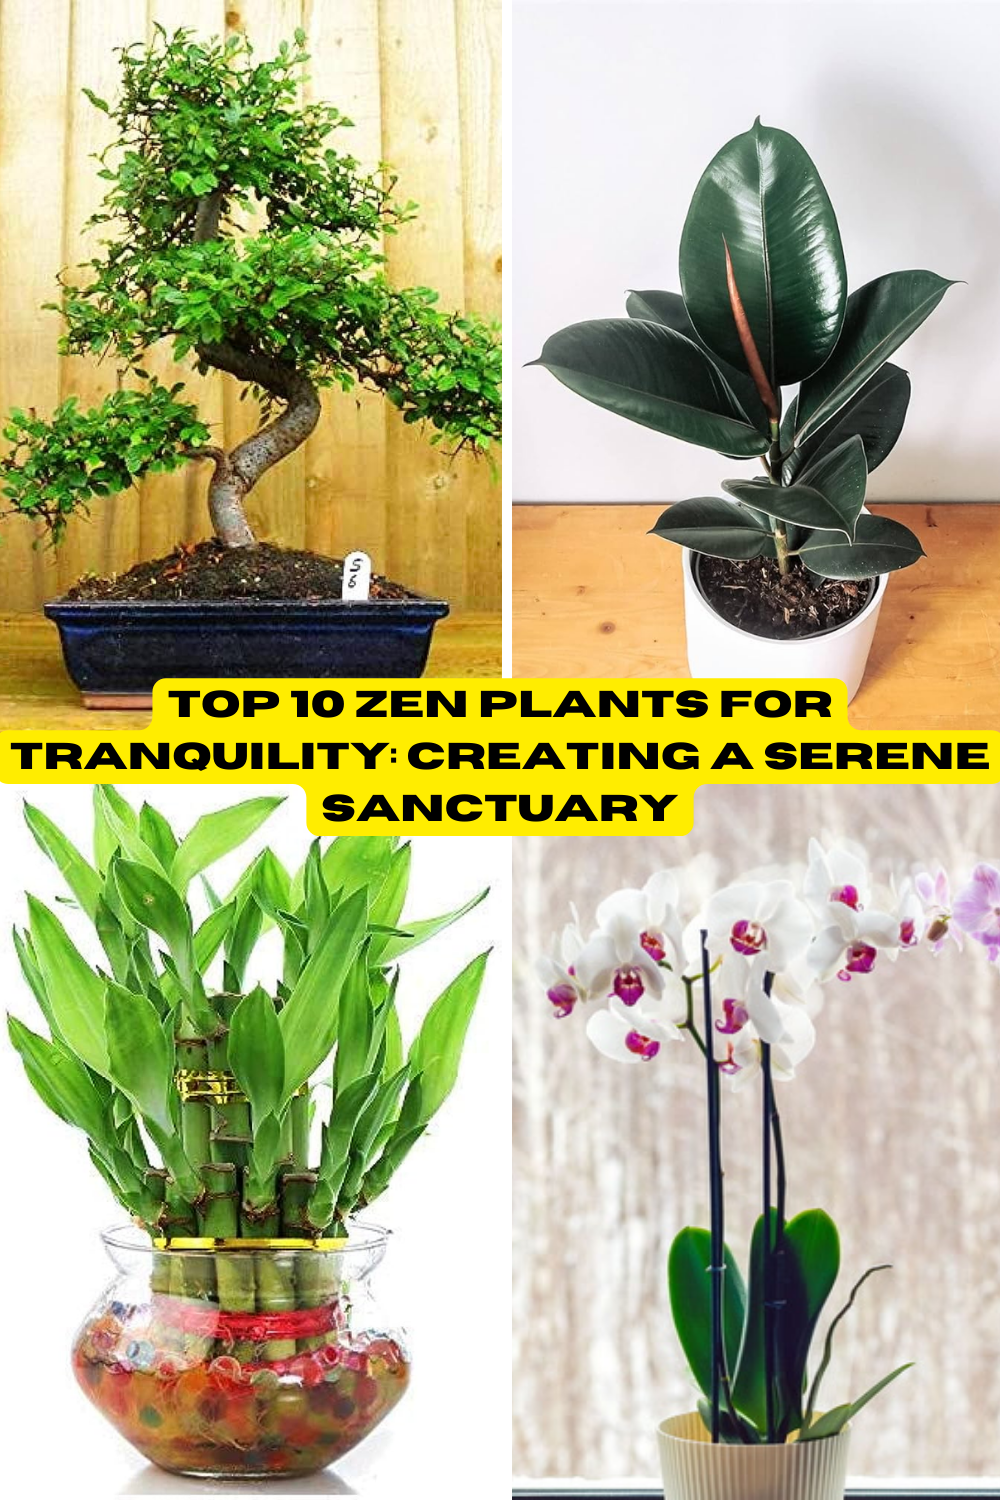 Top 10 Zen Plants for Tranquility: Creating a Serene Sanctuary